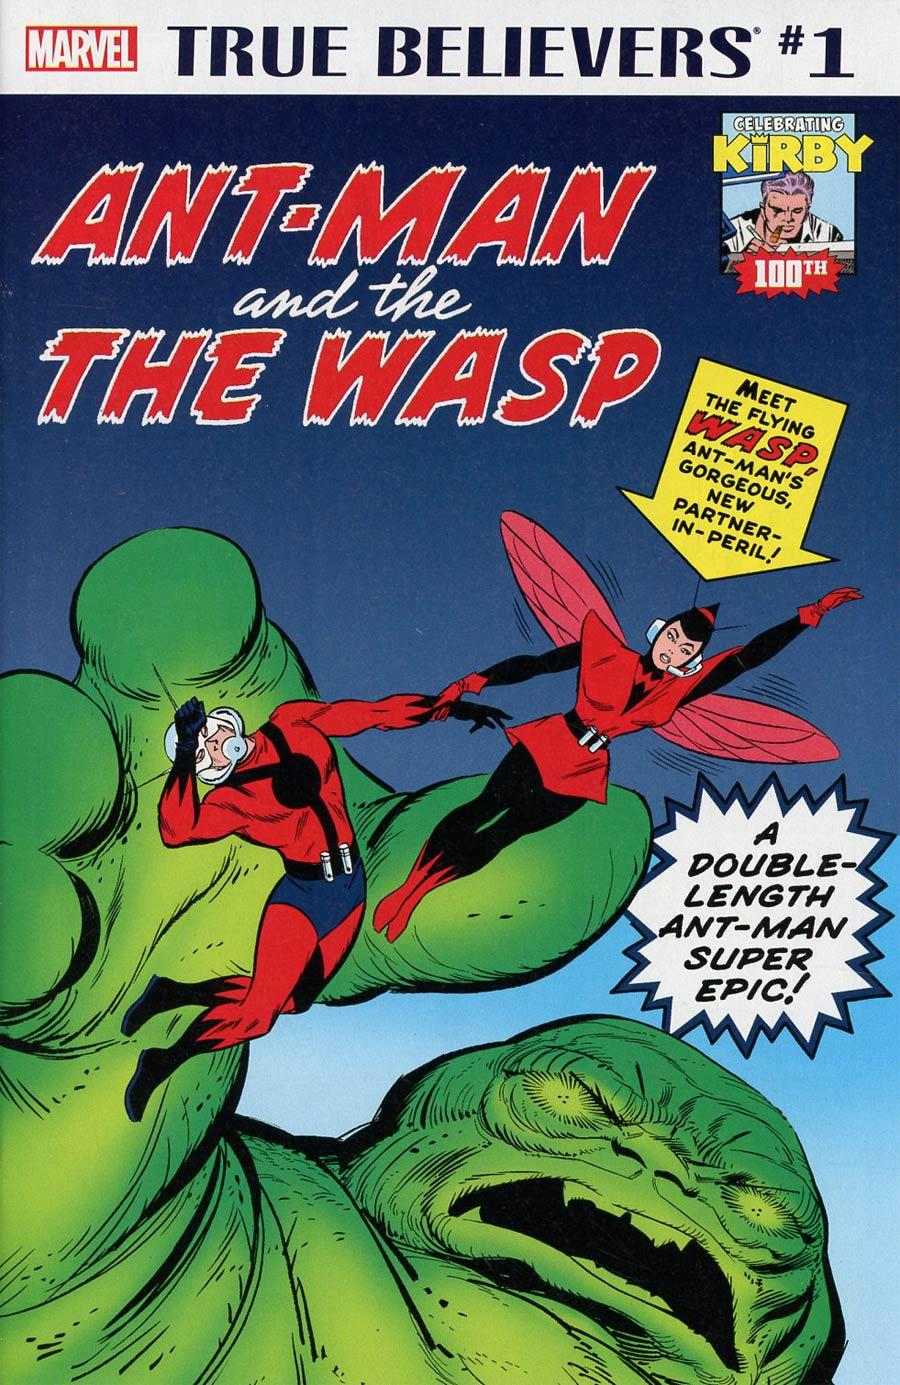 True Believers Jack Kirby 100th Anniversary Ant-Man And The Wasp Vol. 1 #1